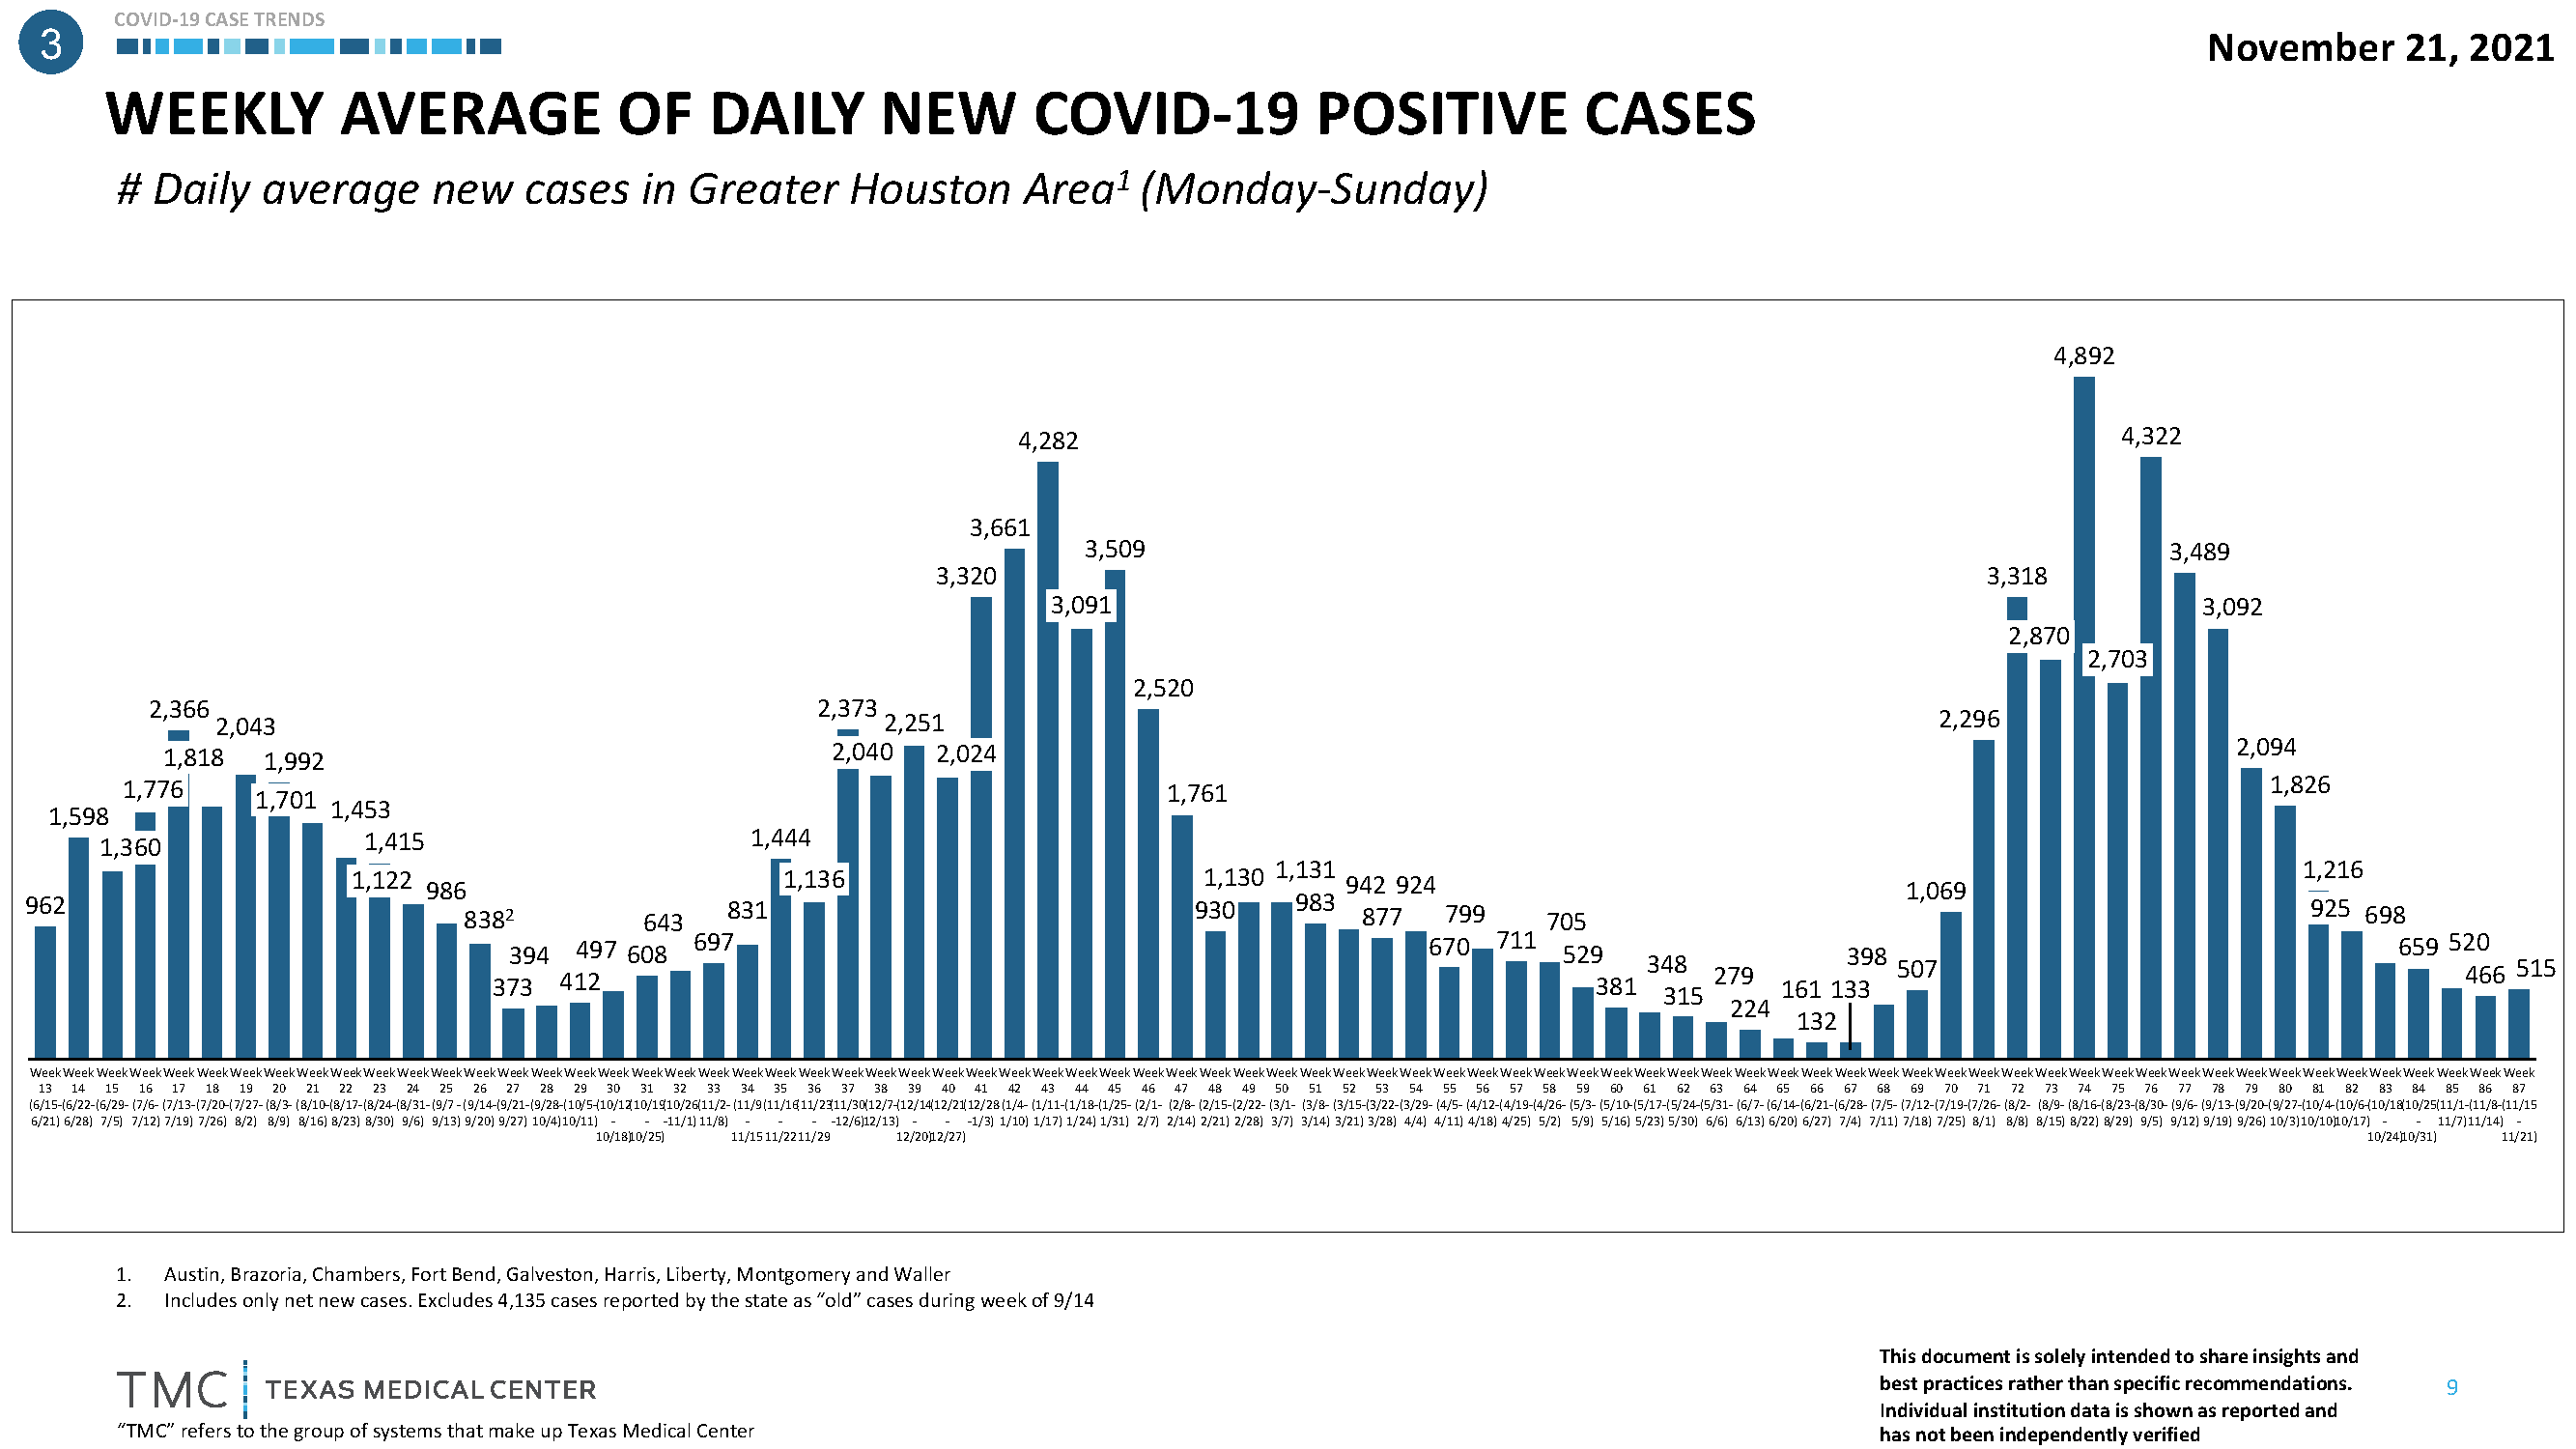 Weekly Average of Daily New COVID-19 Positive Cases